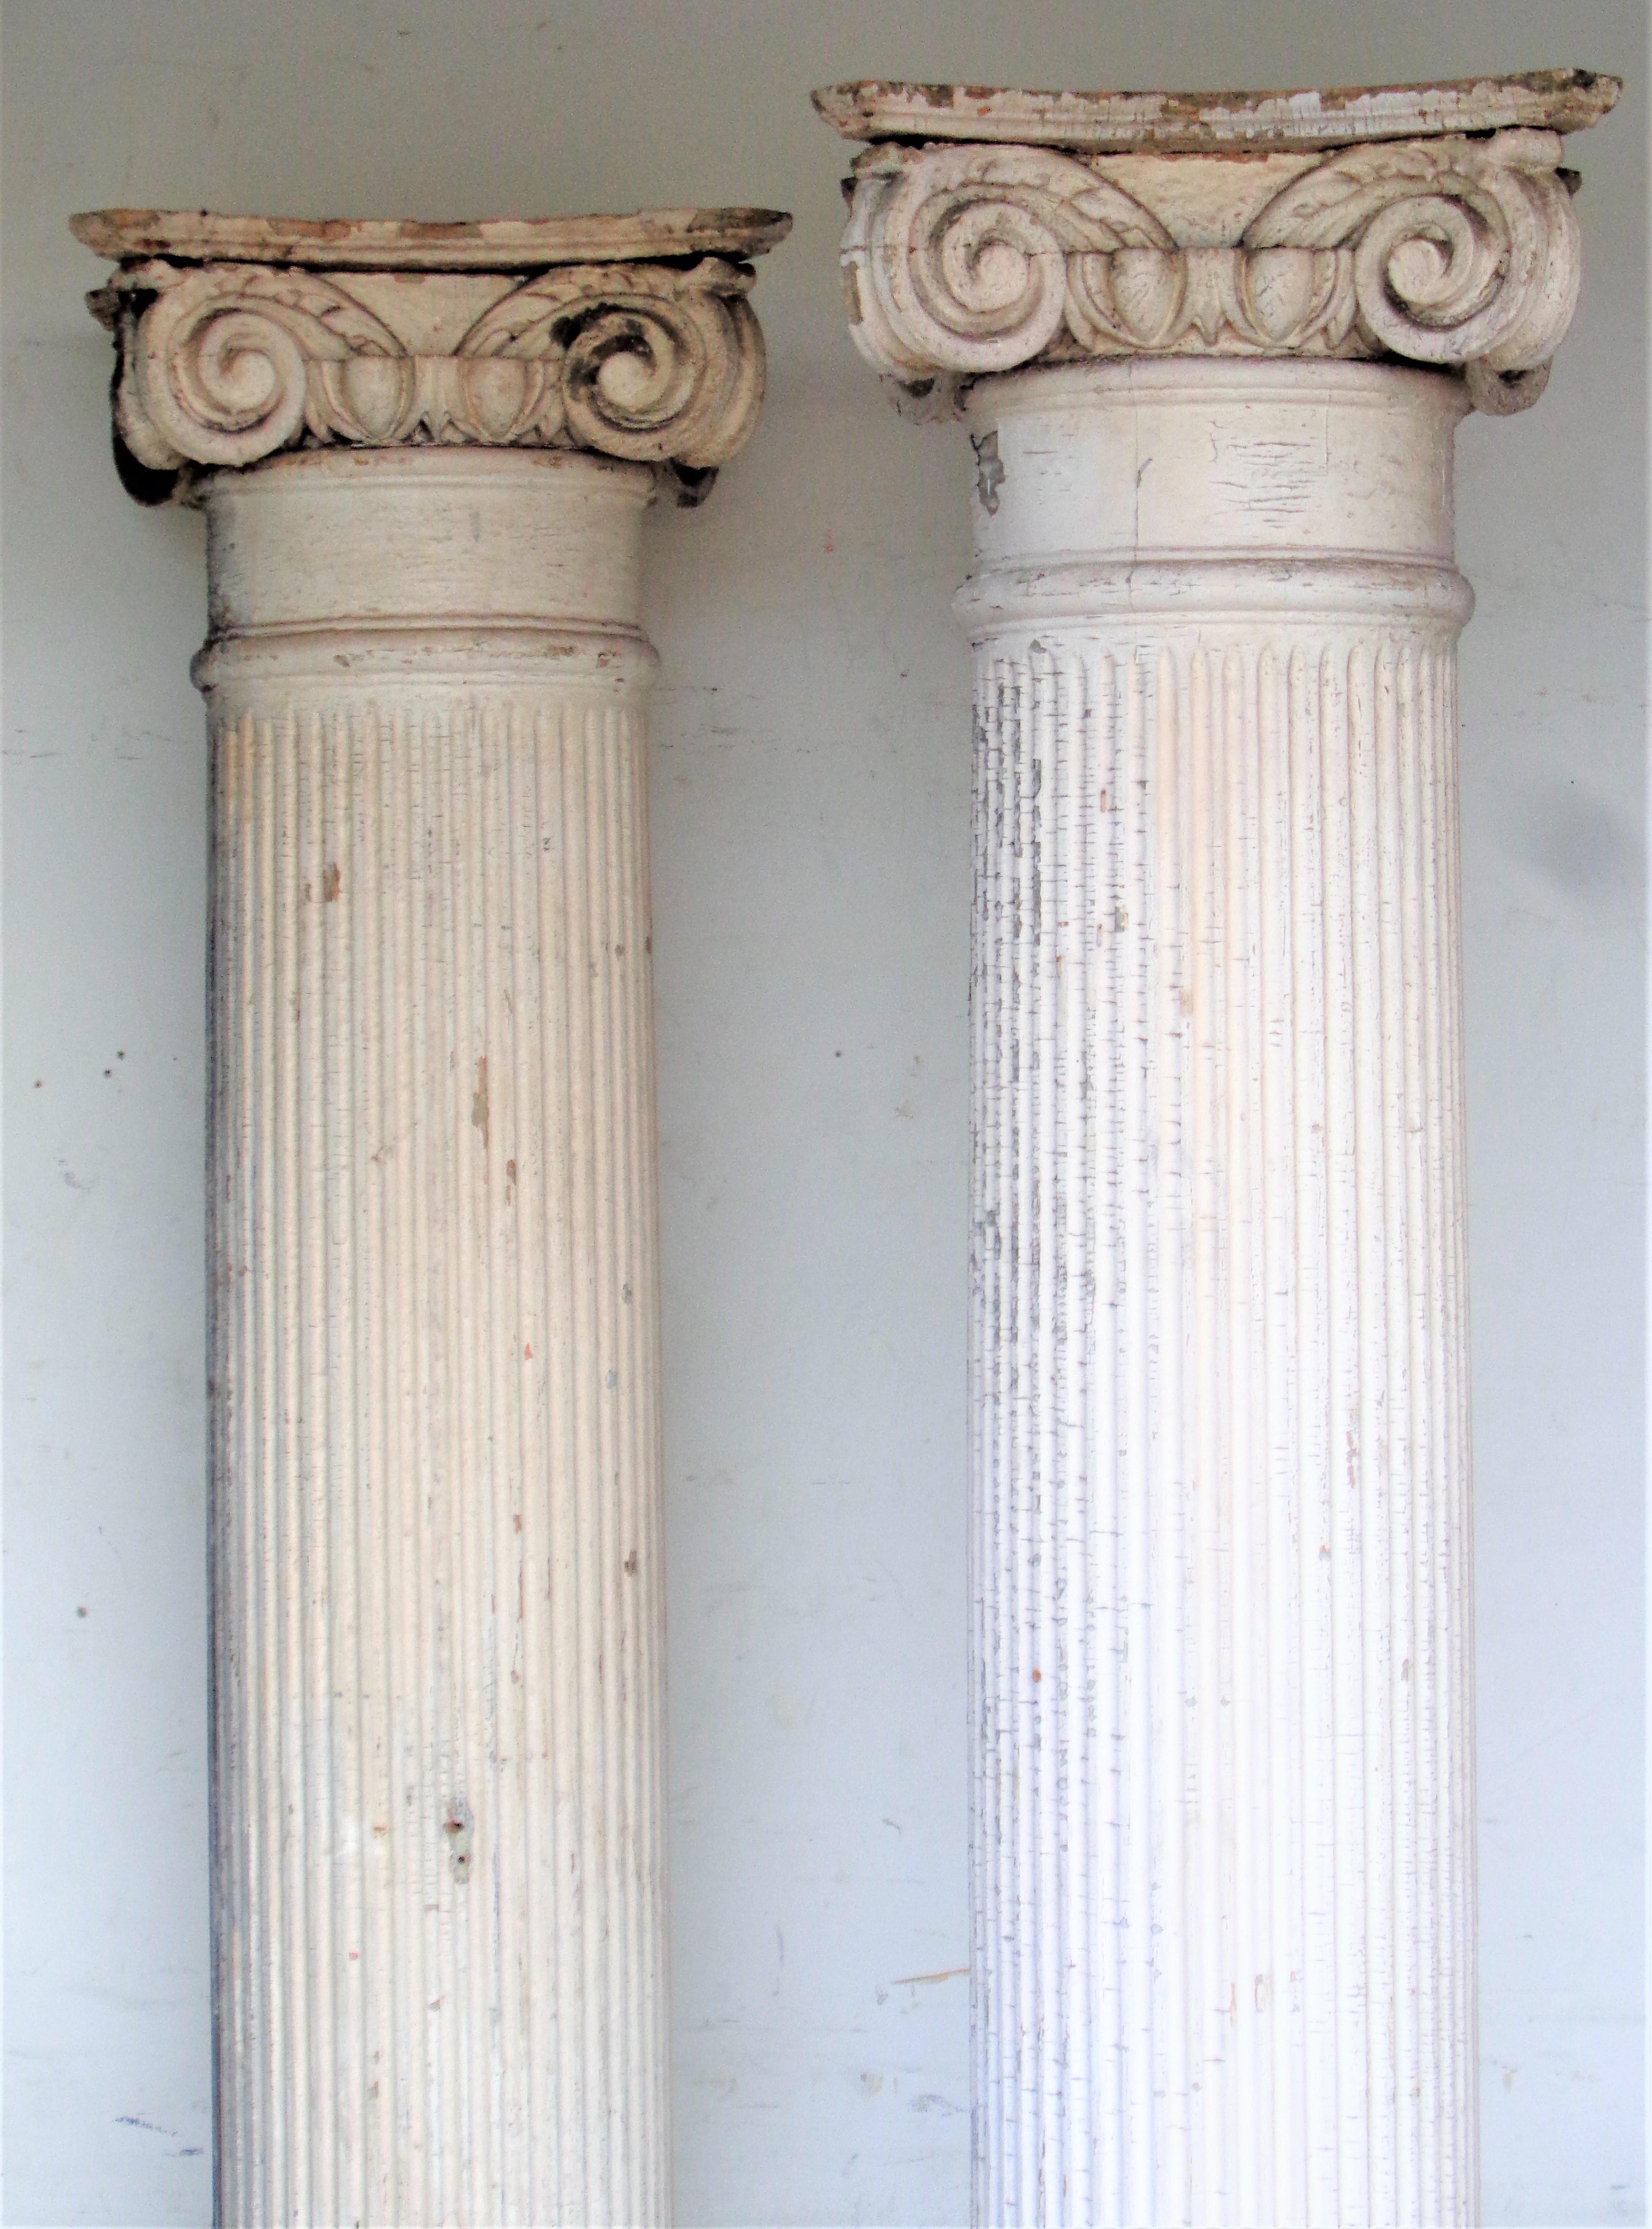 A good pair of antique 19th century American architectural fluted wood columns w/ carved wood Ionic capitals in nicely aged original antique condition w/ old worn soft white painted surface. Columns measure 79 inches high x 12 inches across column x